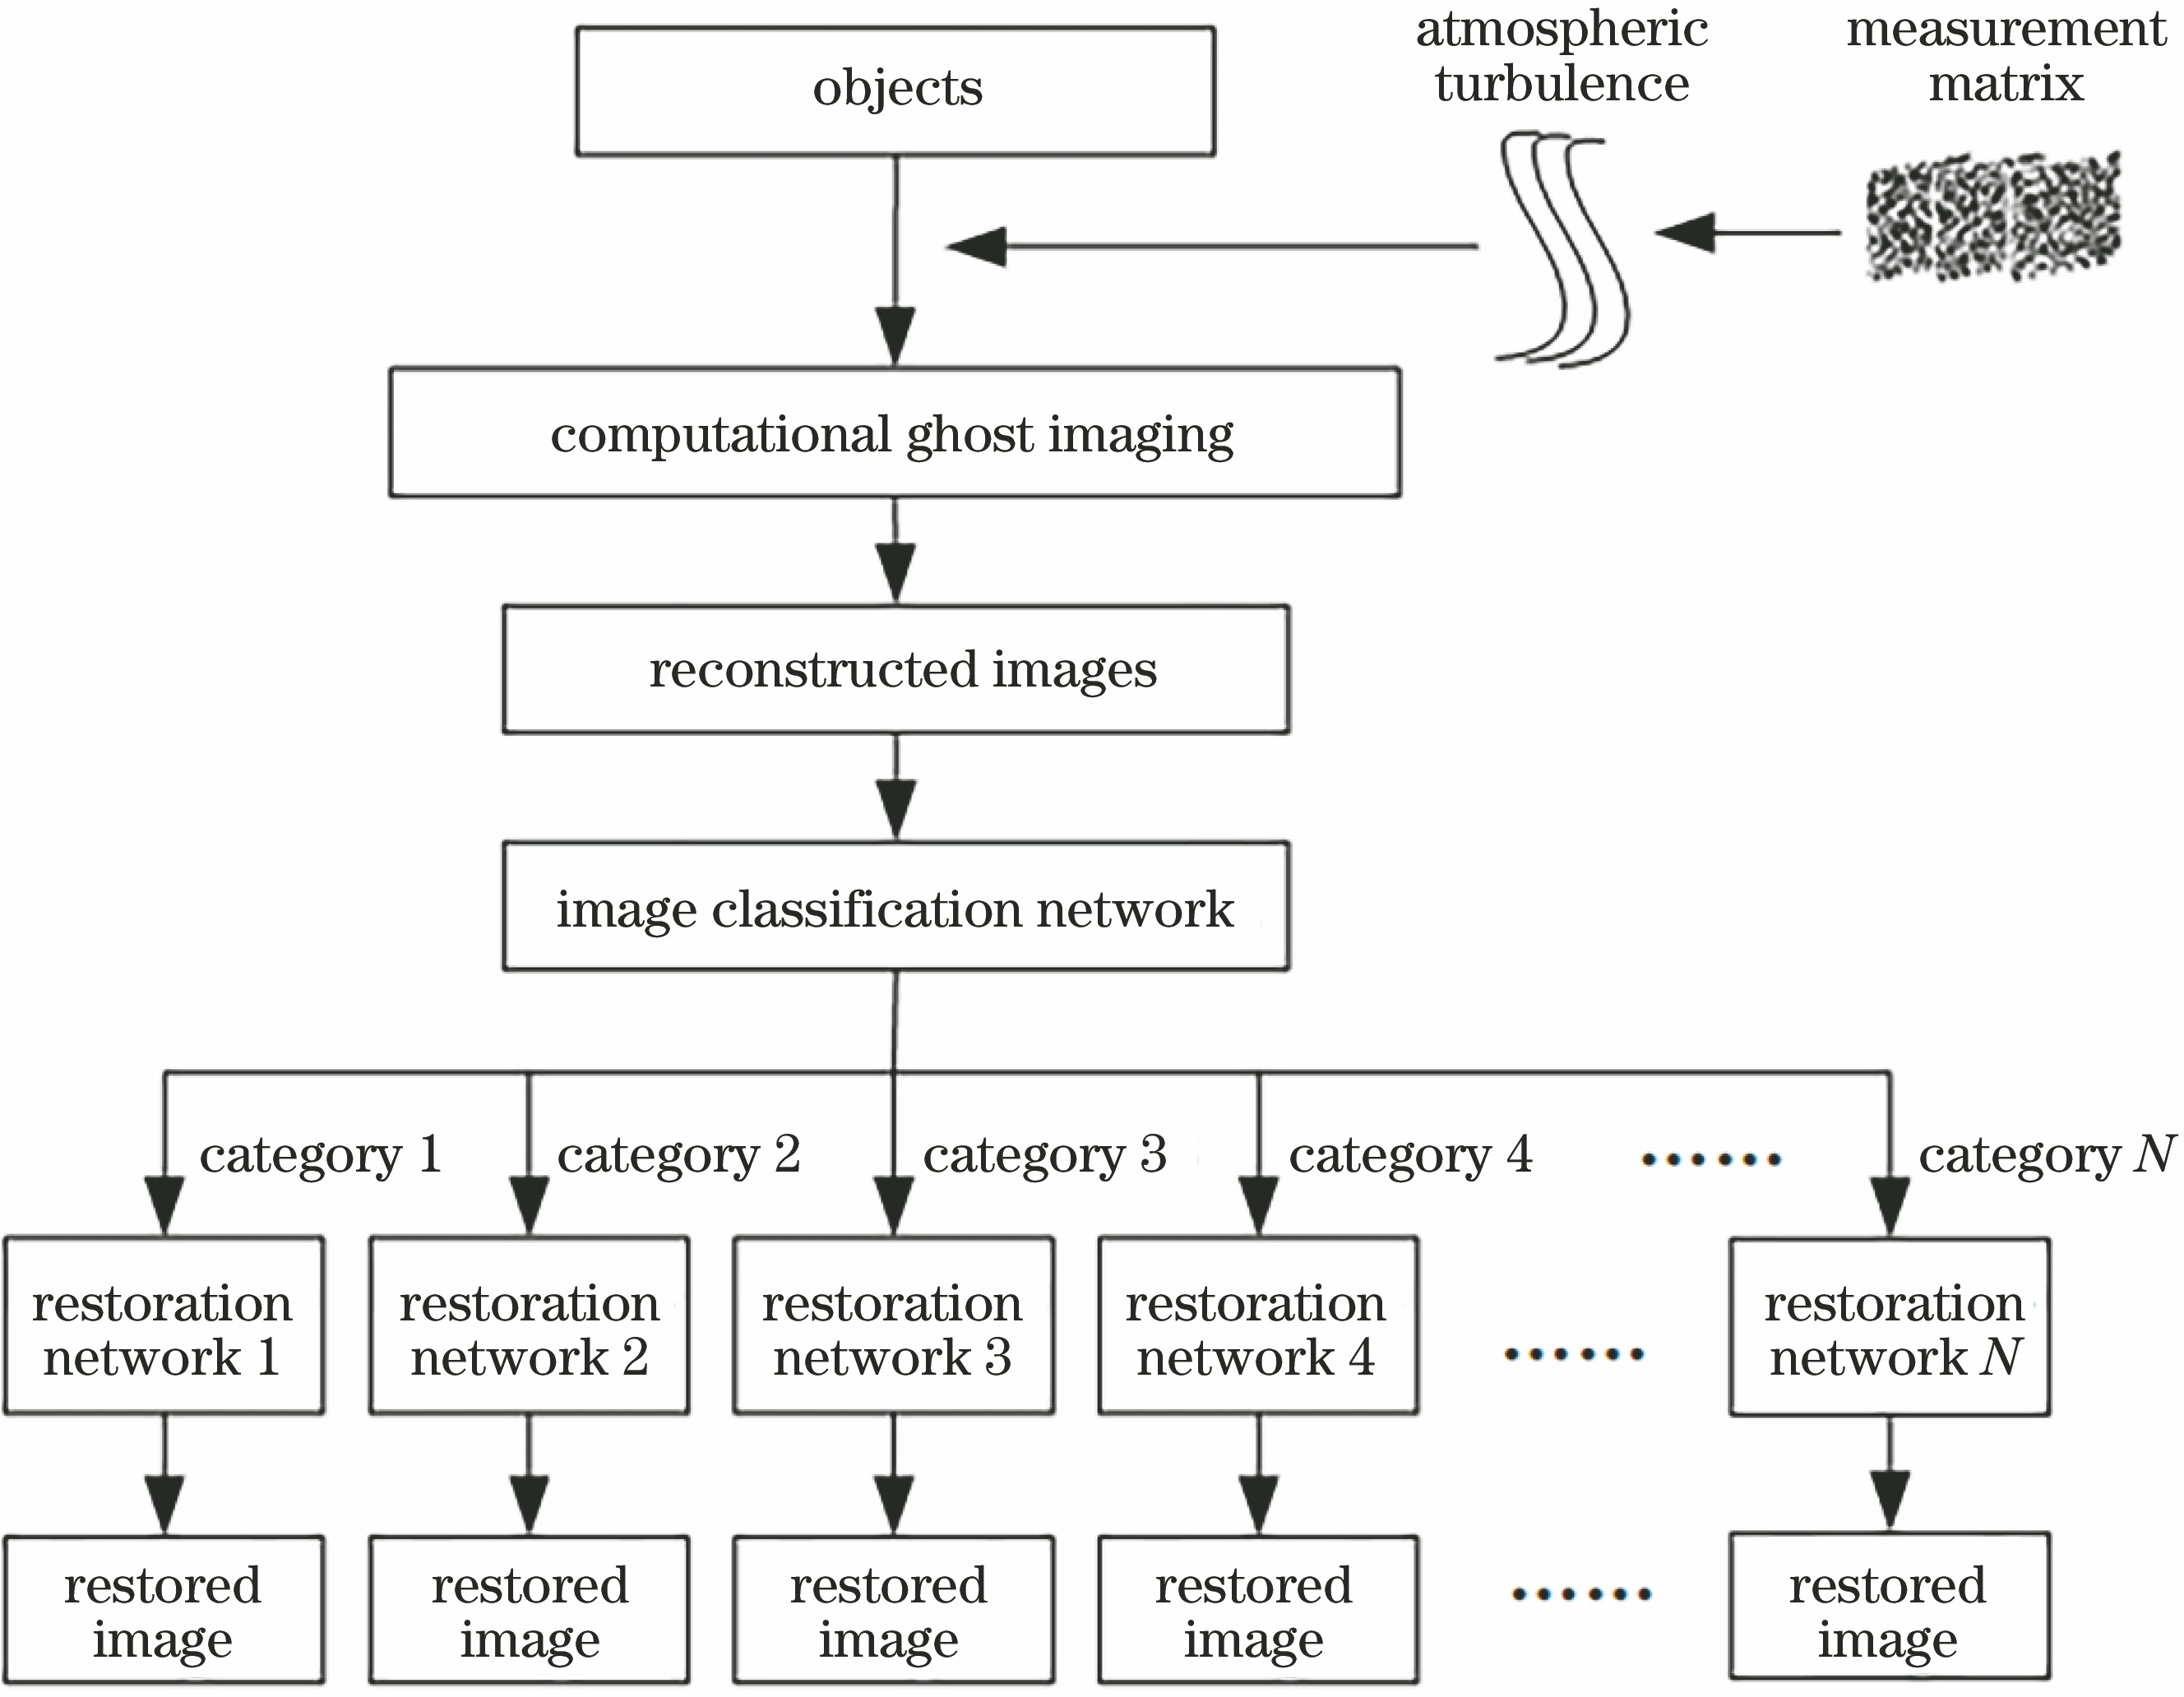 Flow chart of image classification-restoration method used for computational ghost imaging